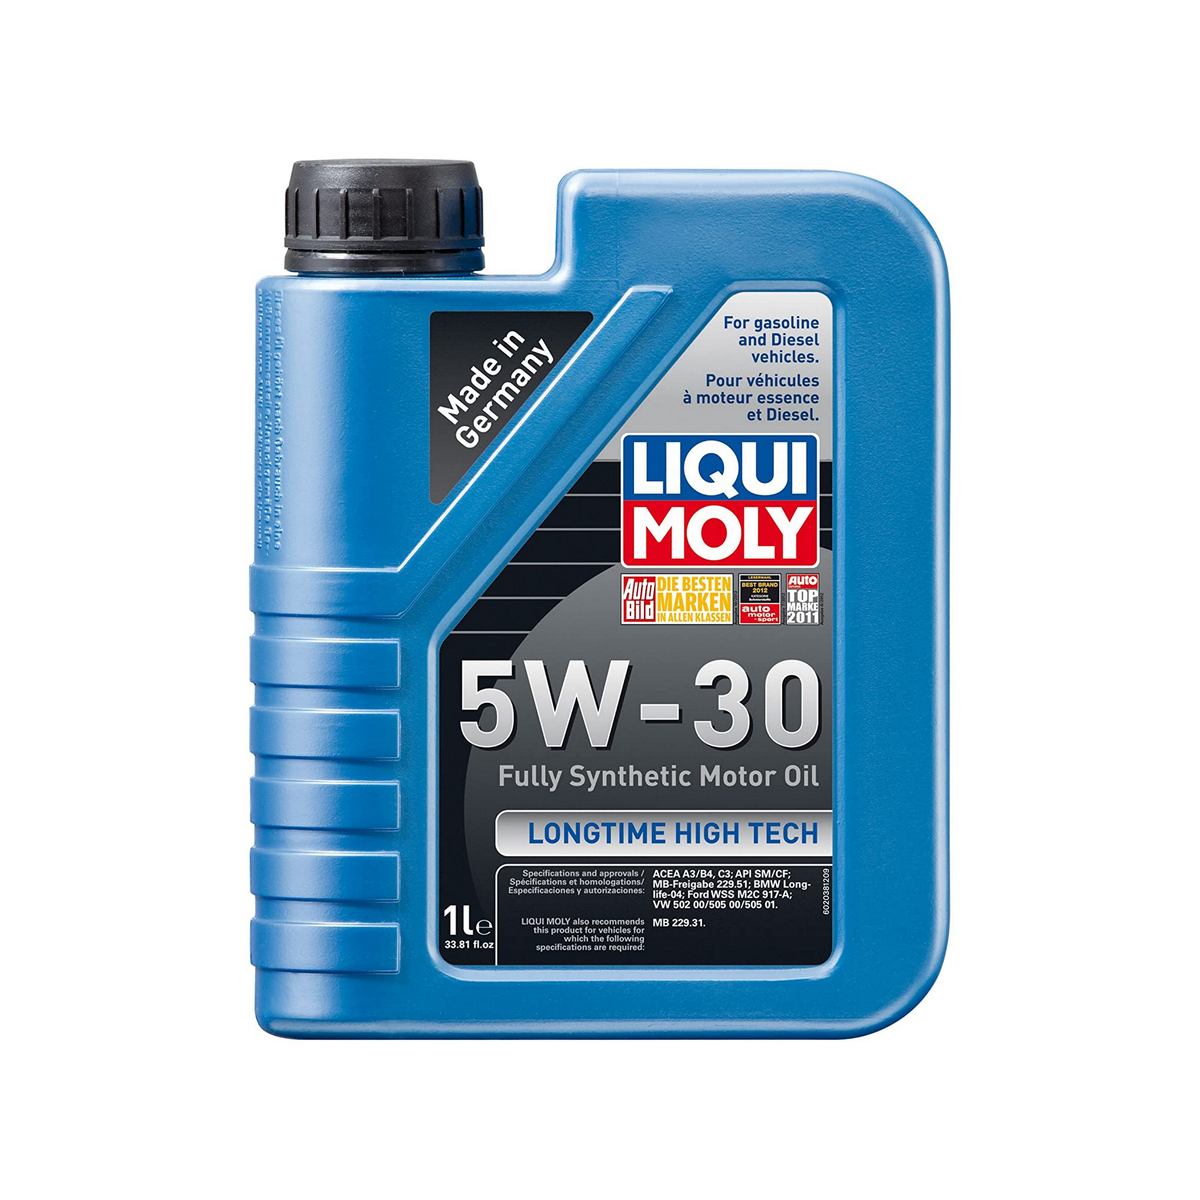 Motor Oil Liqui Moly 5W-30 Synthoil High Tech Editorial Stock Image - Image  of label, cutout: 119173829